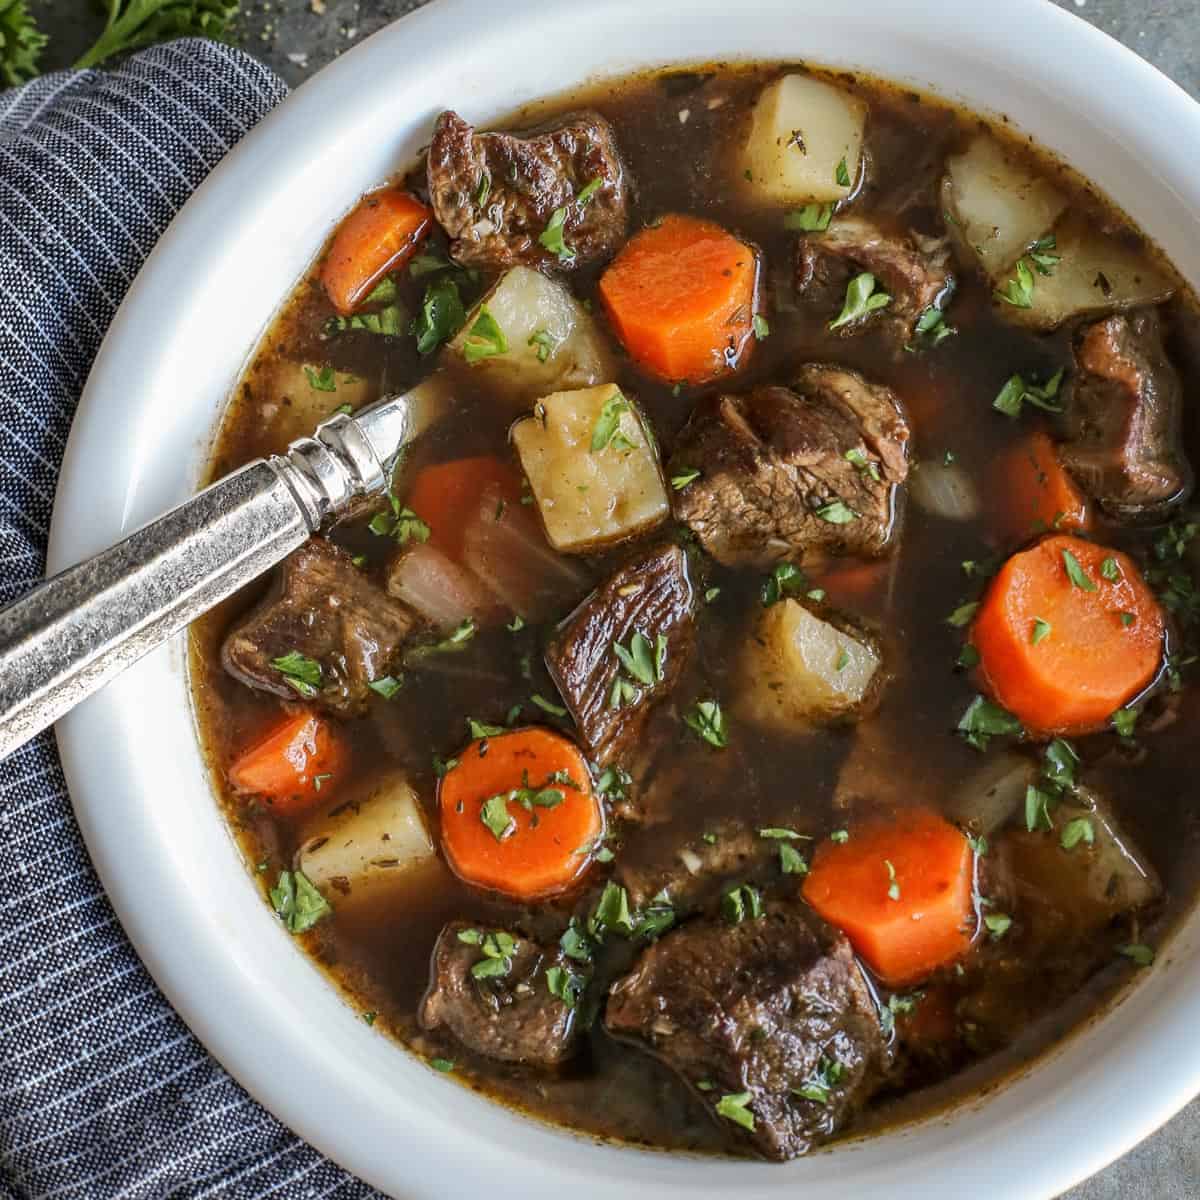 Irish stew with potatoes and carrots